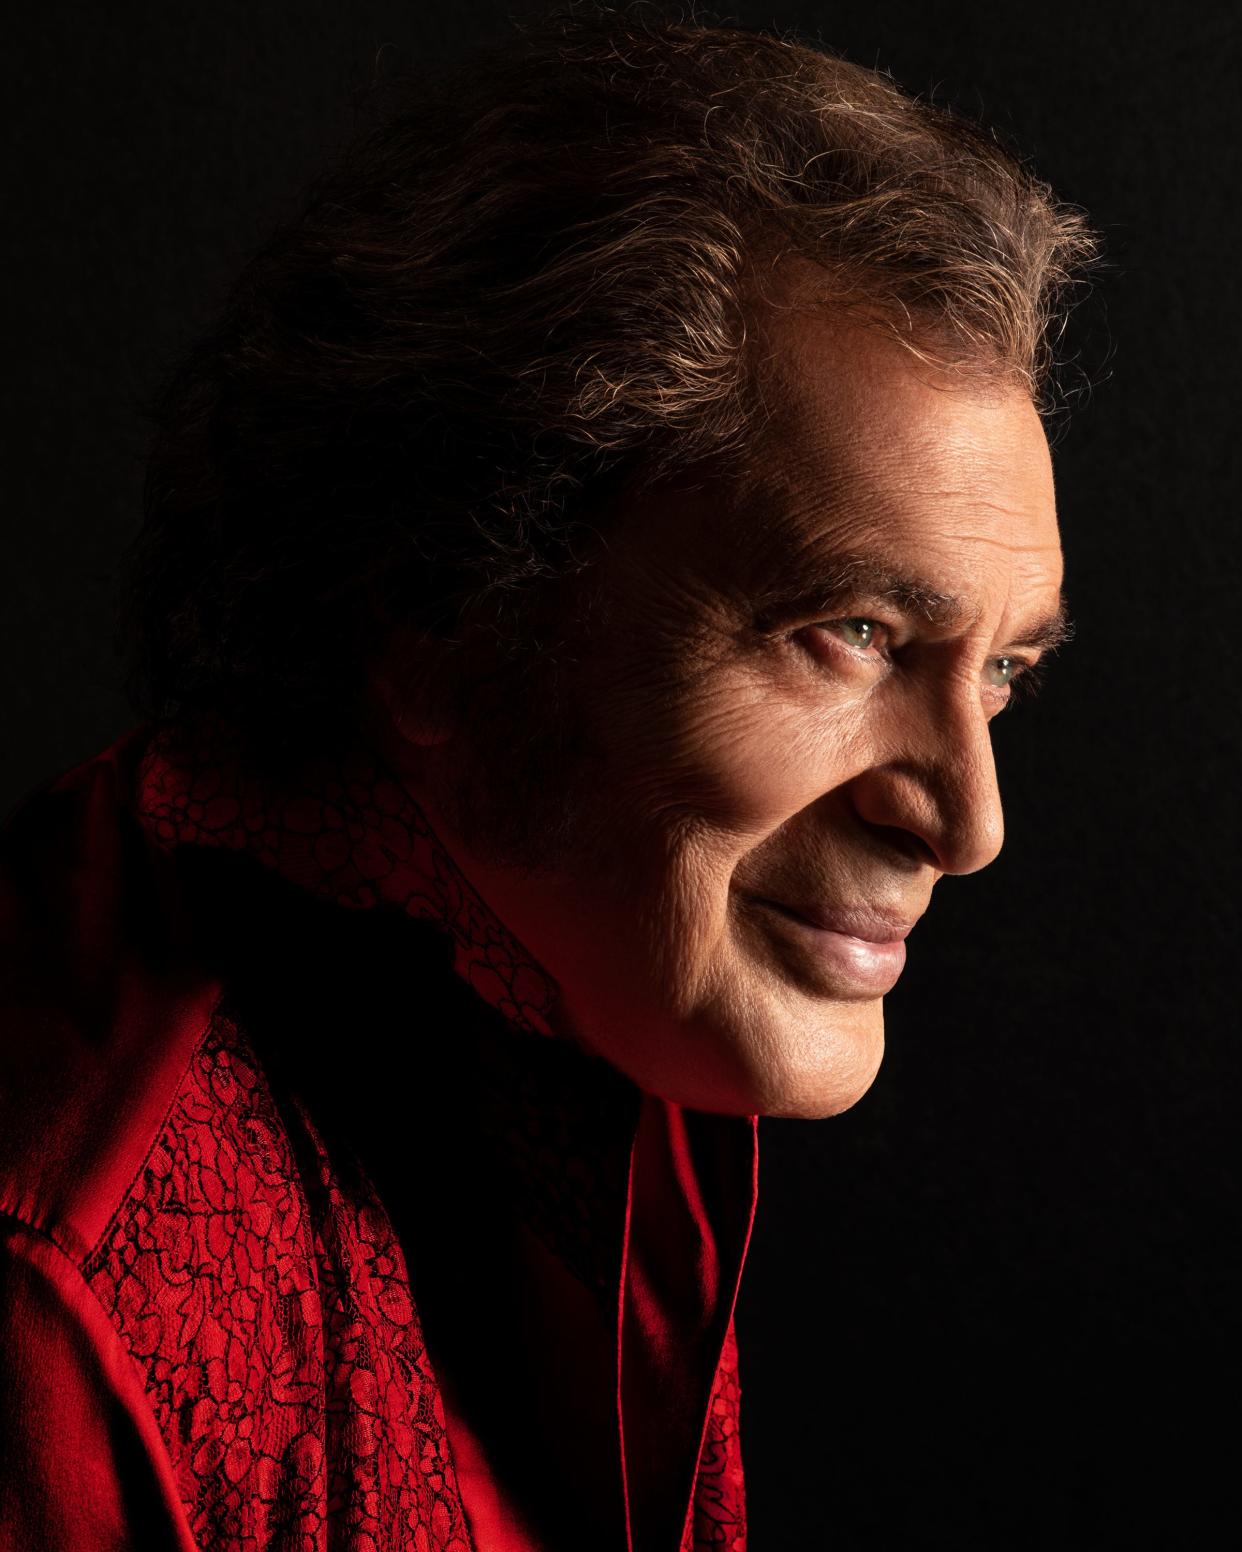 Engelbert Humperdinck brings his "All About Love" tour to The Hanover Theatre and Conservatory for the Performing Arts on Sept. 27.